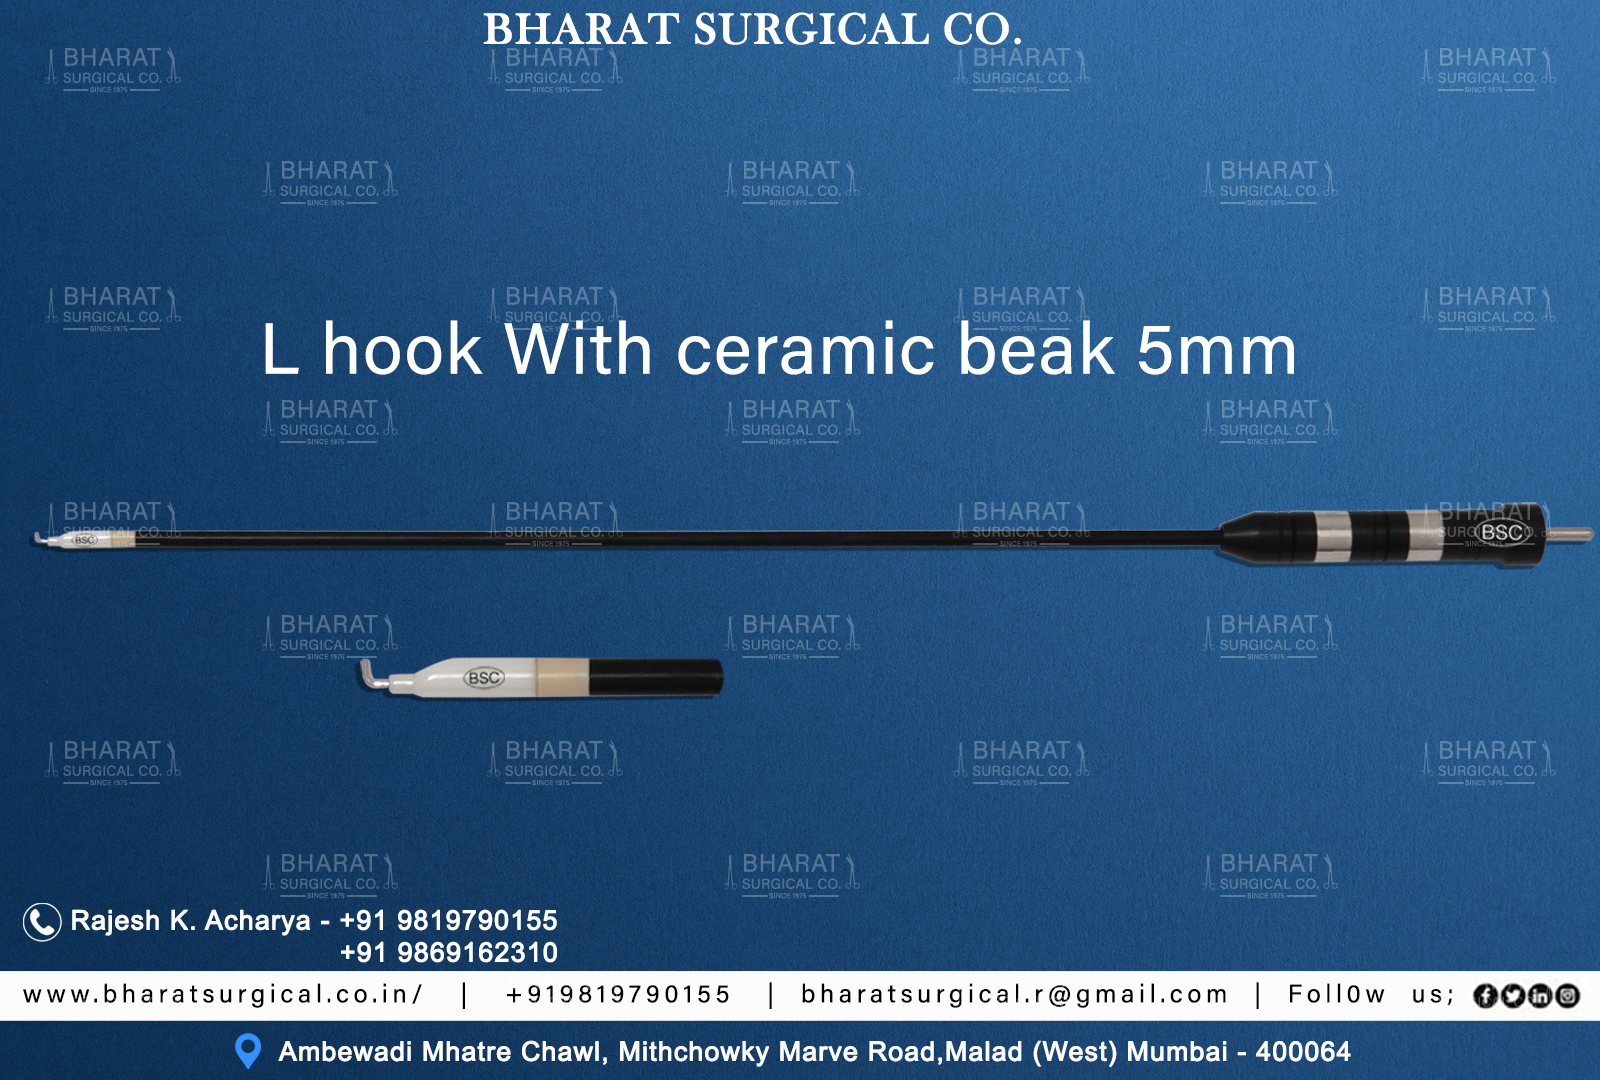 L hook Ceramic Beak manufacturers , suppliers and exporters